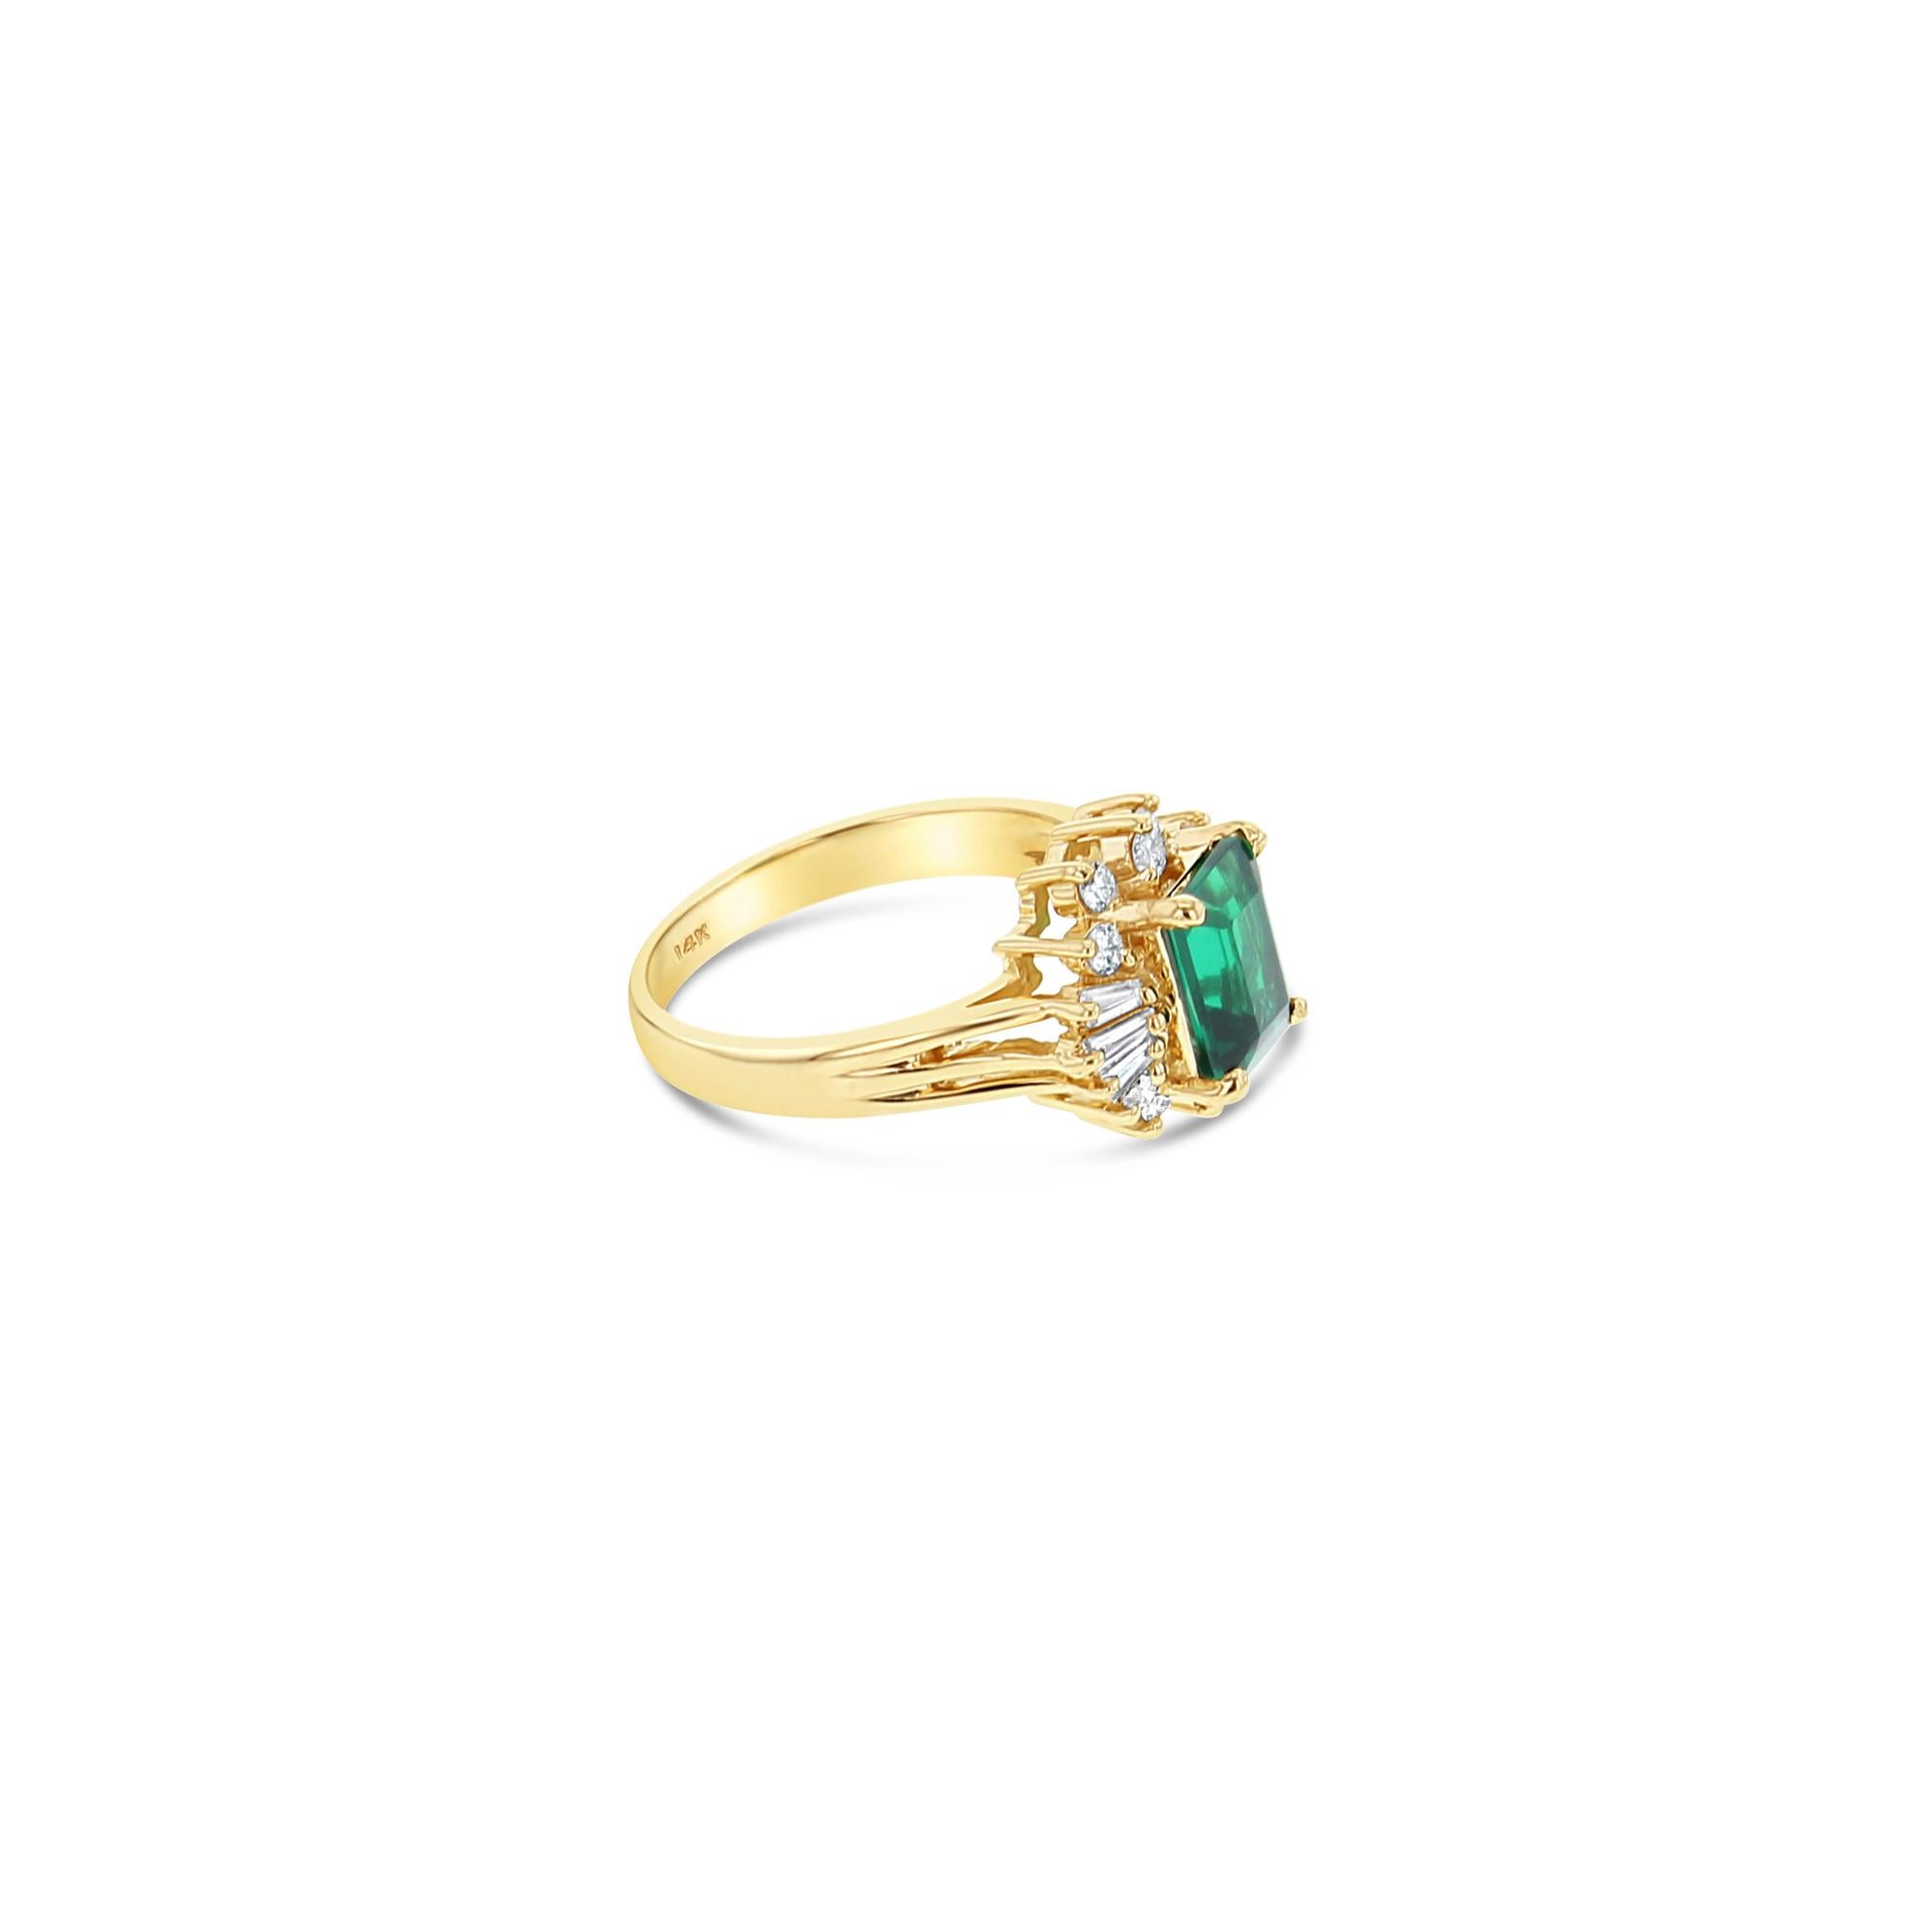 ♥ Product Summary ♥

Main Stone: Lab Generated Emerald & Diamonds
Approx. Diamond Carat Weight: .50cttw 
Emerald Dimensions: 8mm x 6mm 
Stone Cut: Emerald, Round, Tapered Baguette
Metal: 14K Yellow Gold

